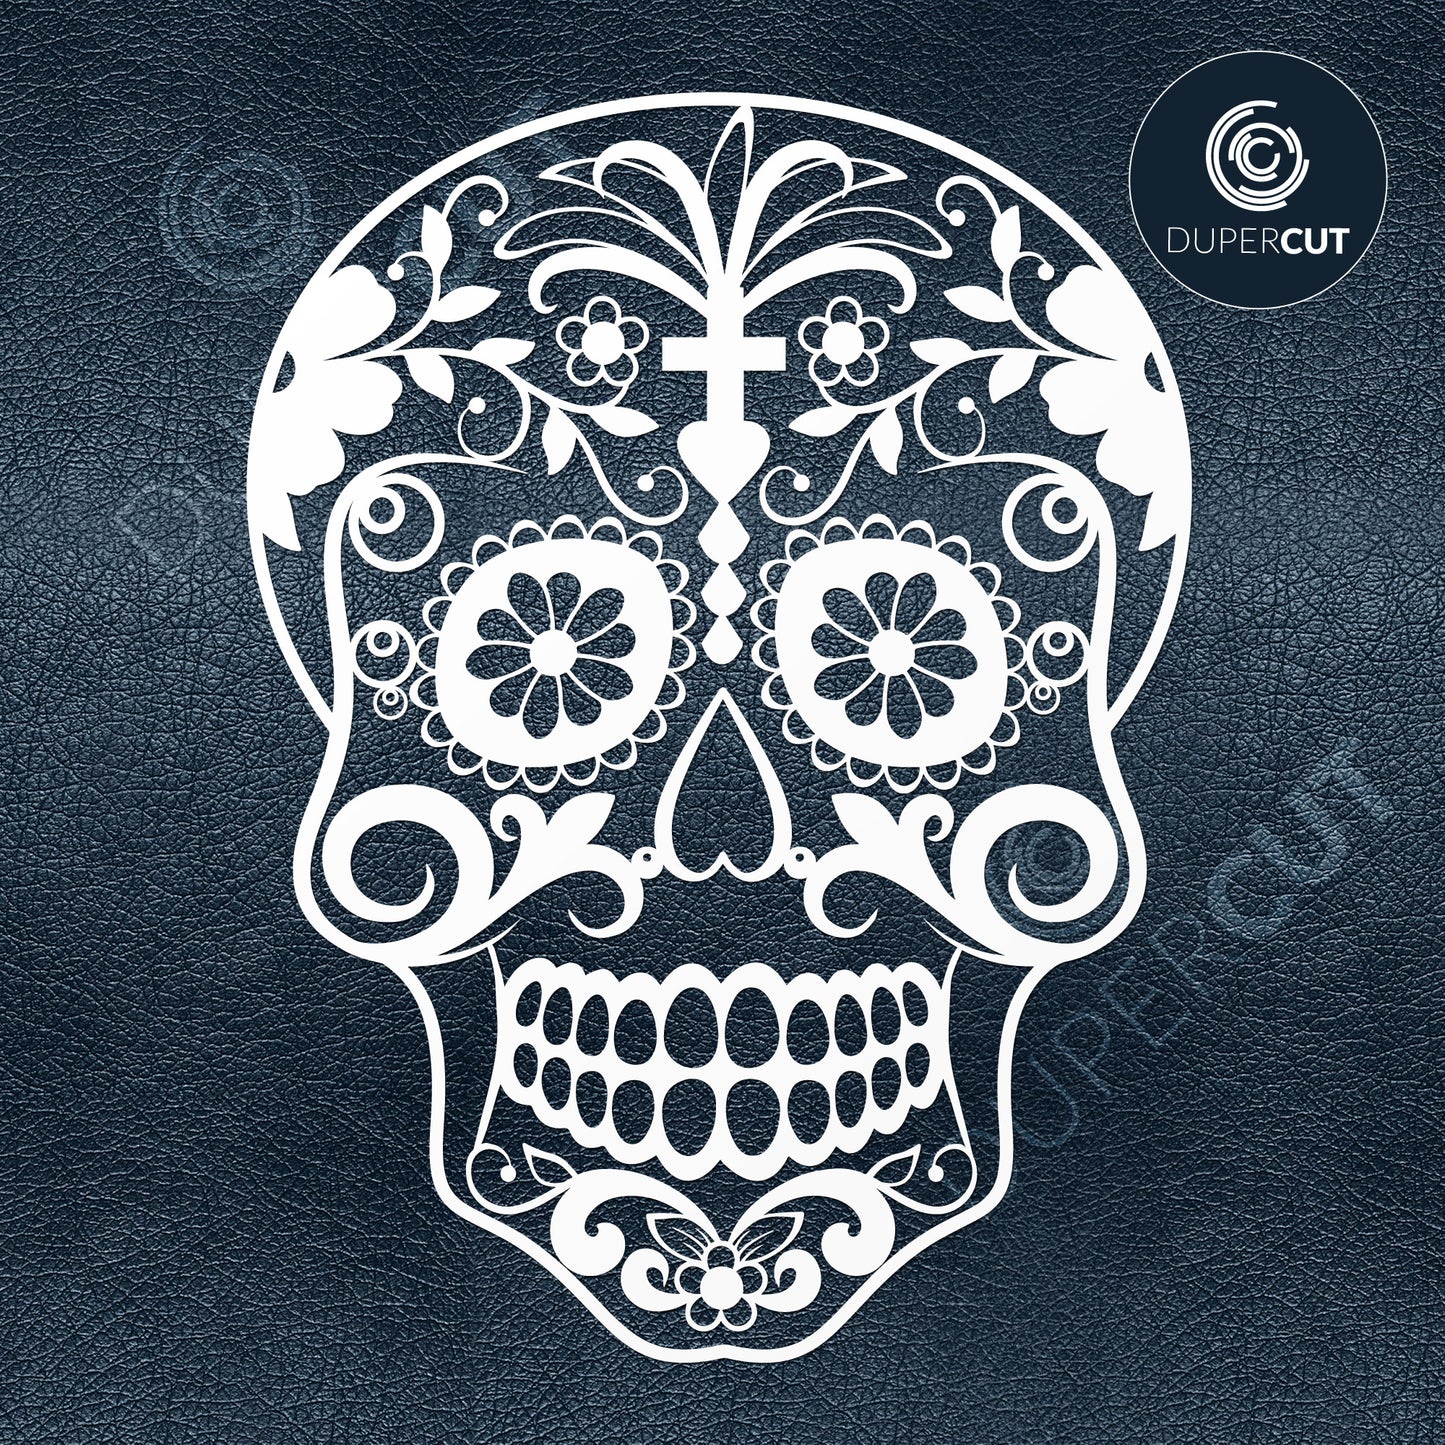 Mexican sugar skull, day of the dead  template - SVG DXF PNG files for Cricut, Glowforge, Silhouette Cameo, CNC Machines